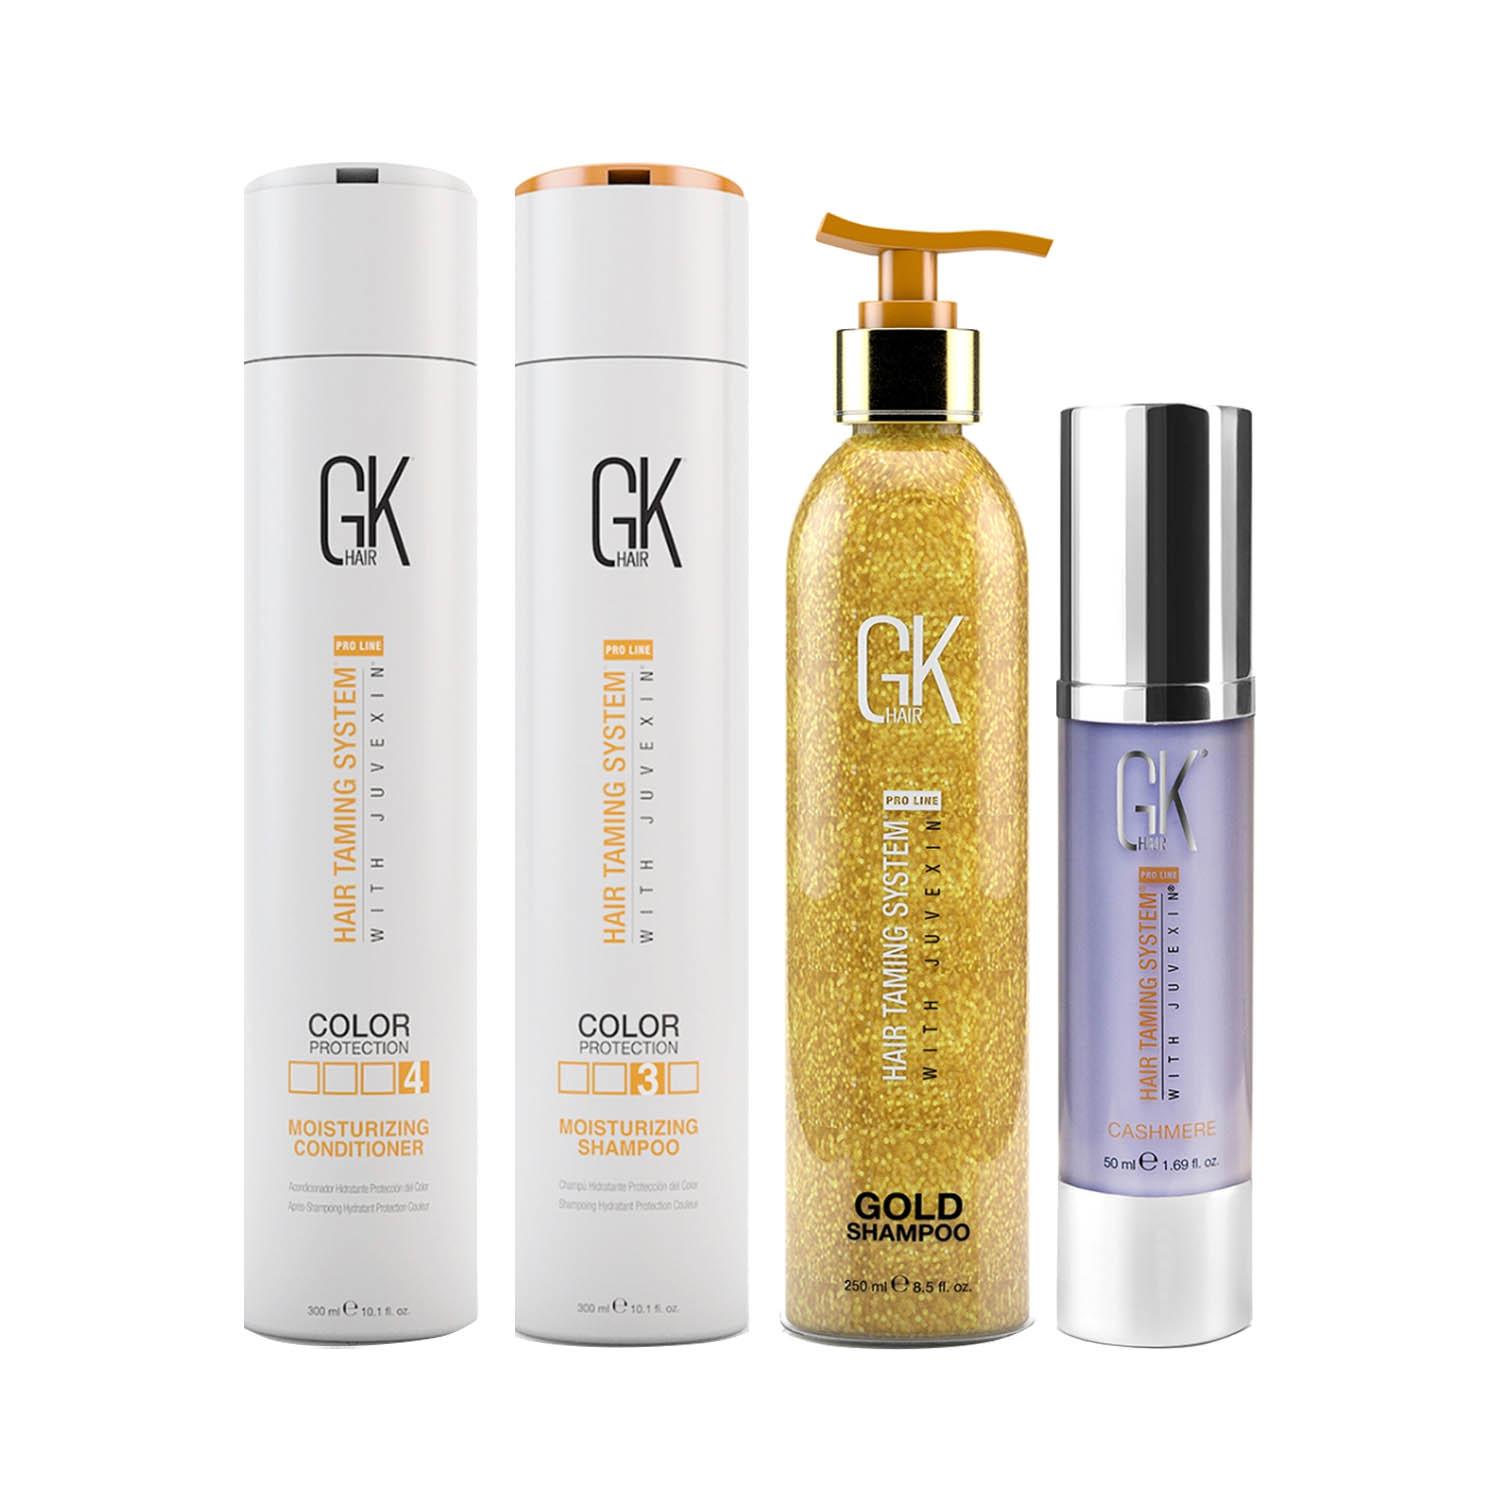 GK Hair | GK Hair Moisturizing Shampoo and Conditioner 300ml with Cashmere 50ml and Gold Shampoo 250ml